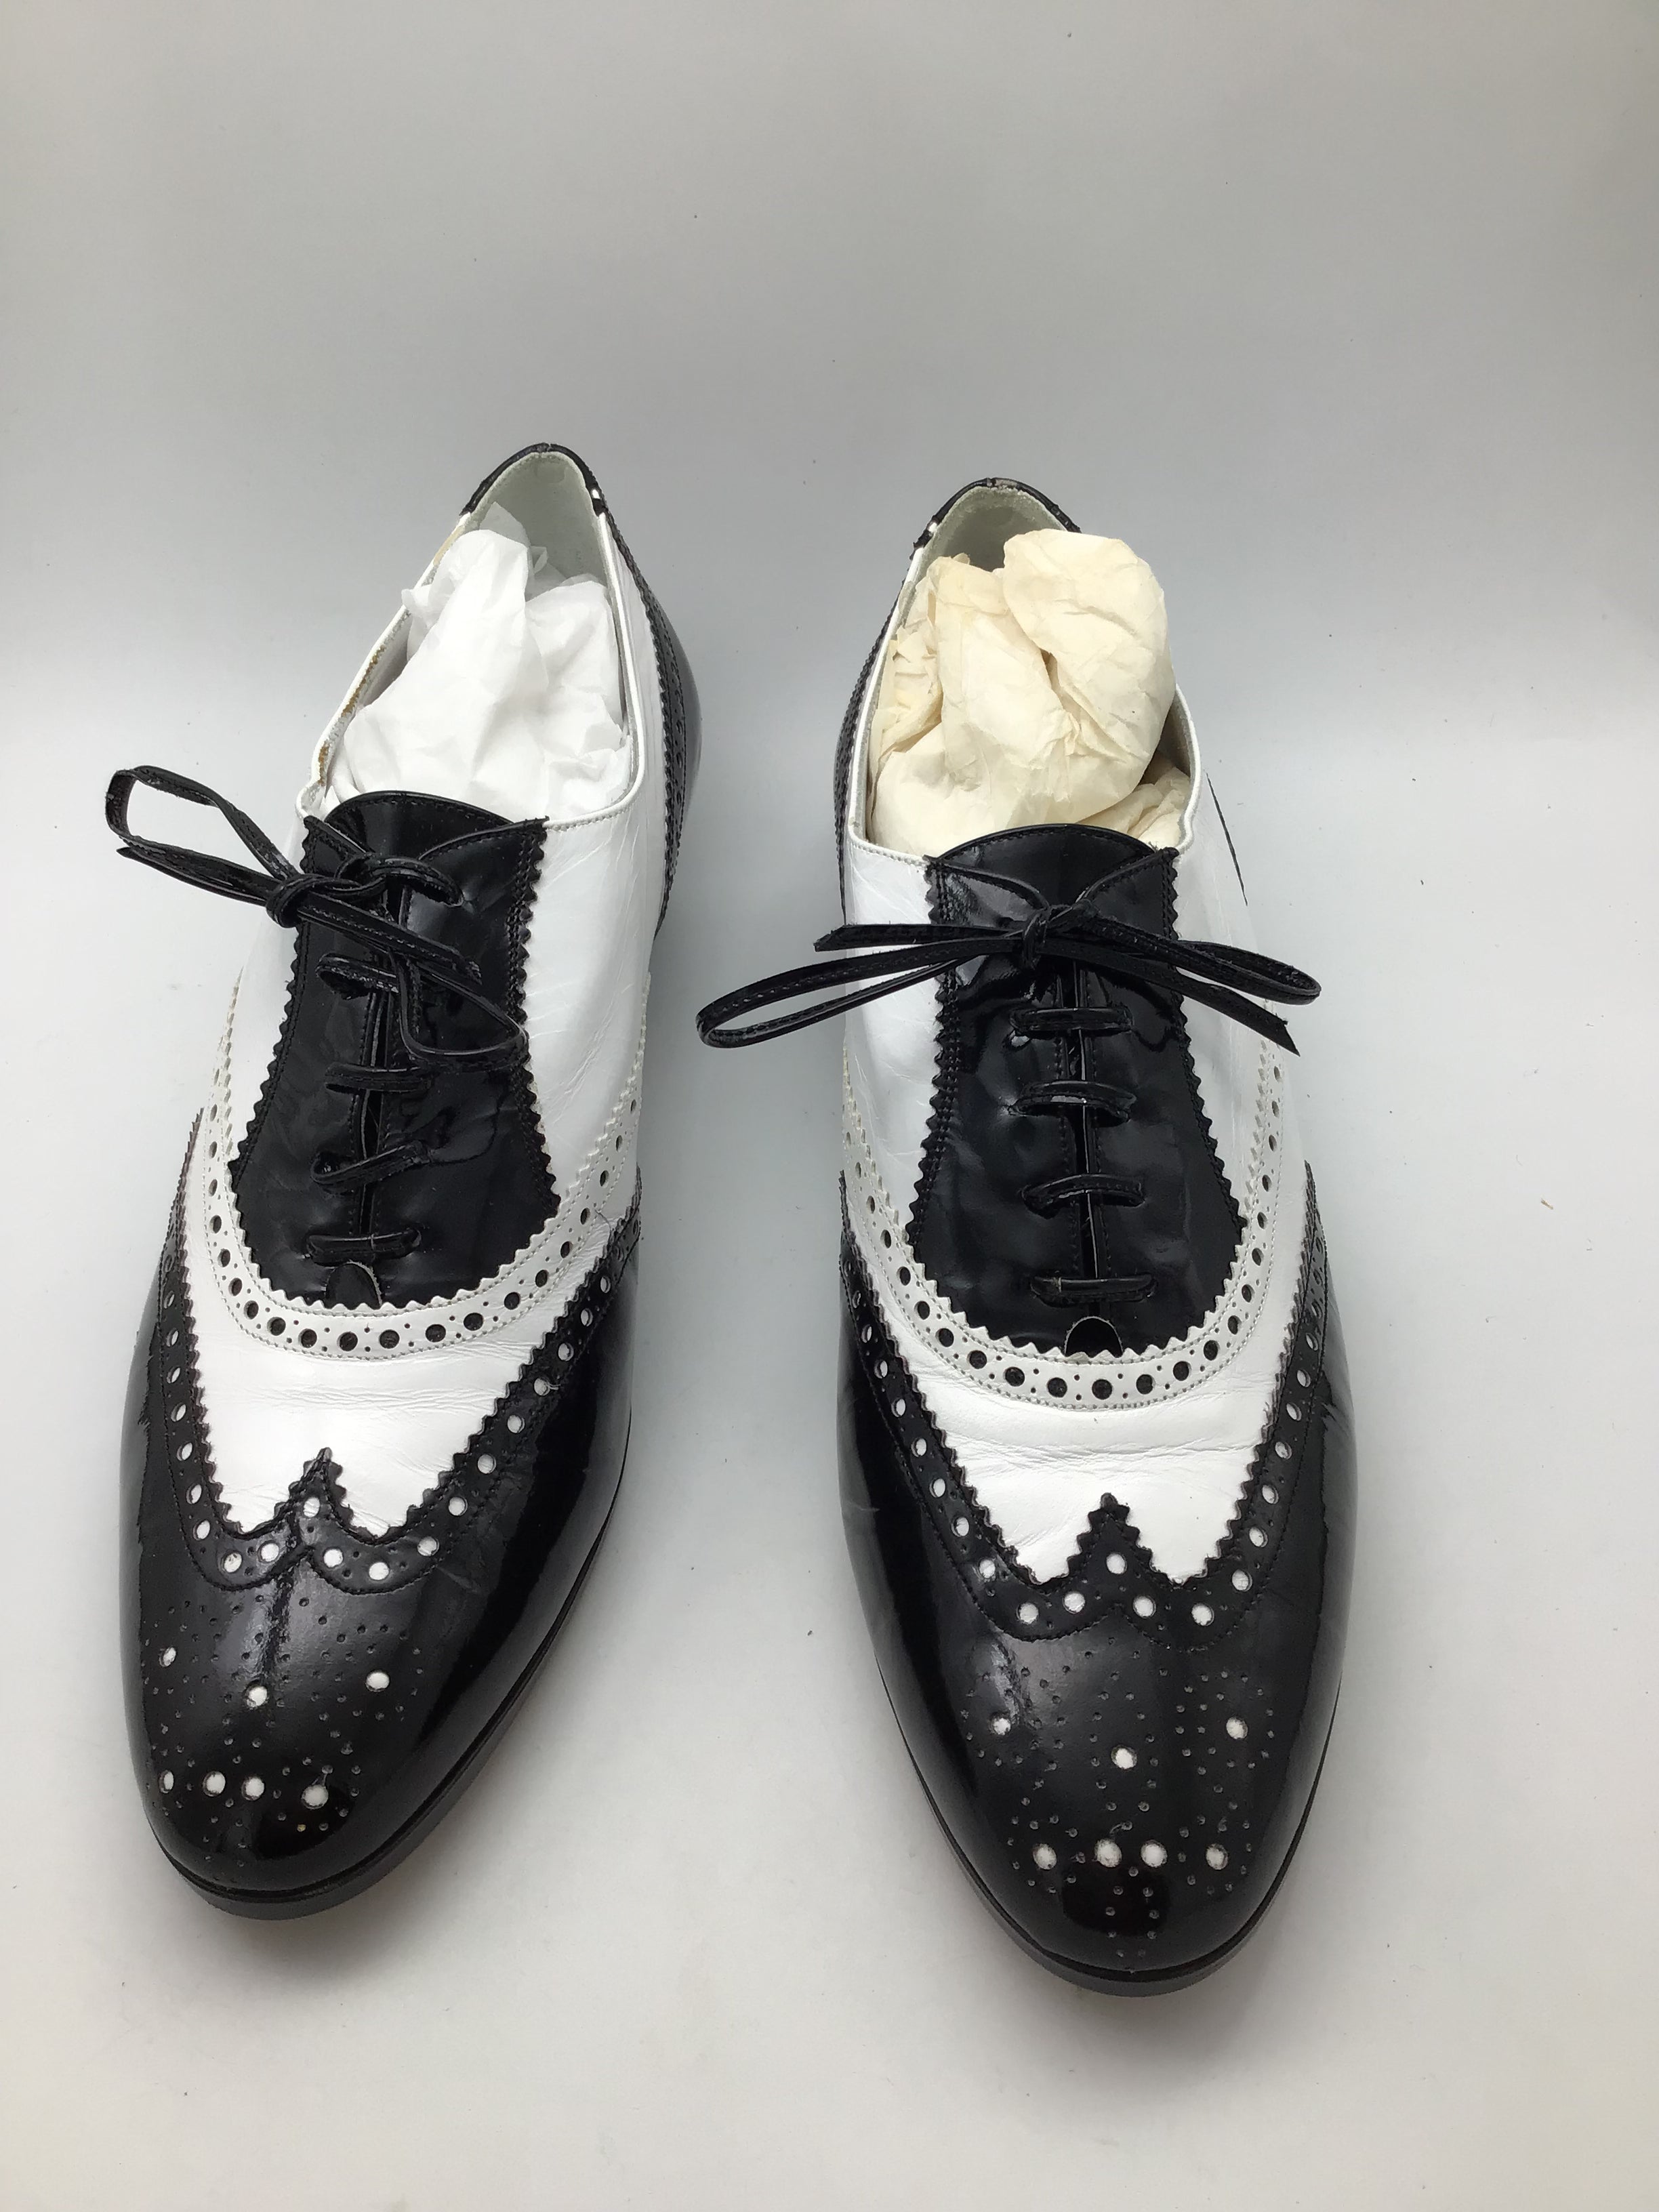 Vintage 1950s Black and White Wingtip Shoes and Red Pumps